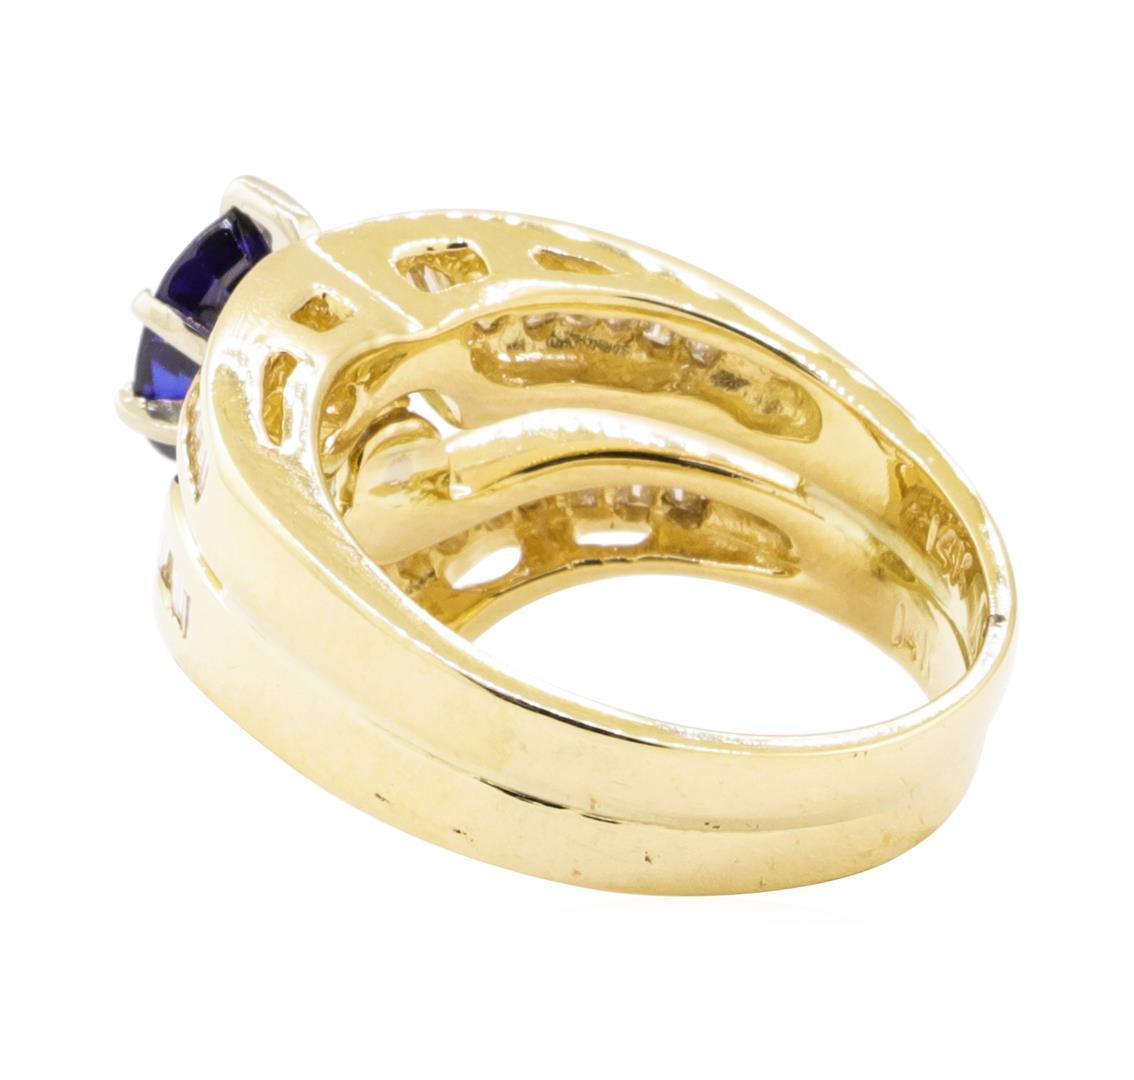 2.28 ctw Blue Sapphire And Diamond Ring And Attached Band - 14KT Yellow Gold